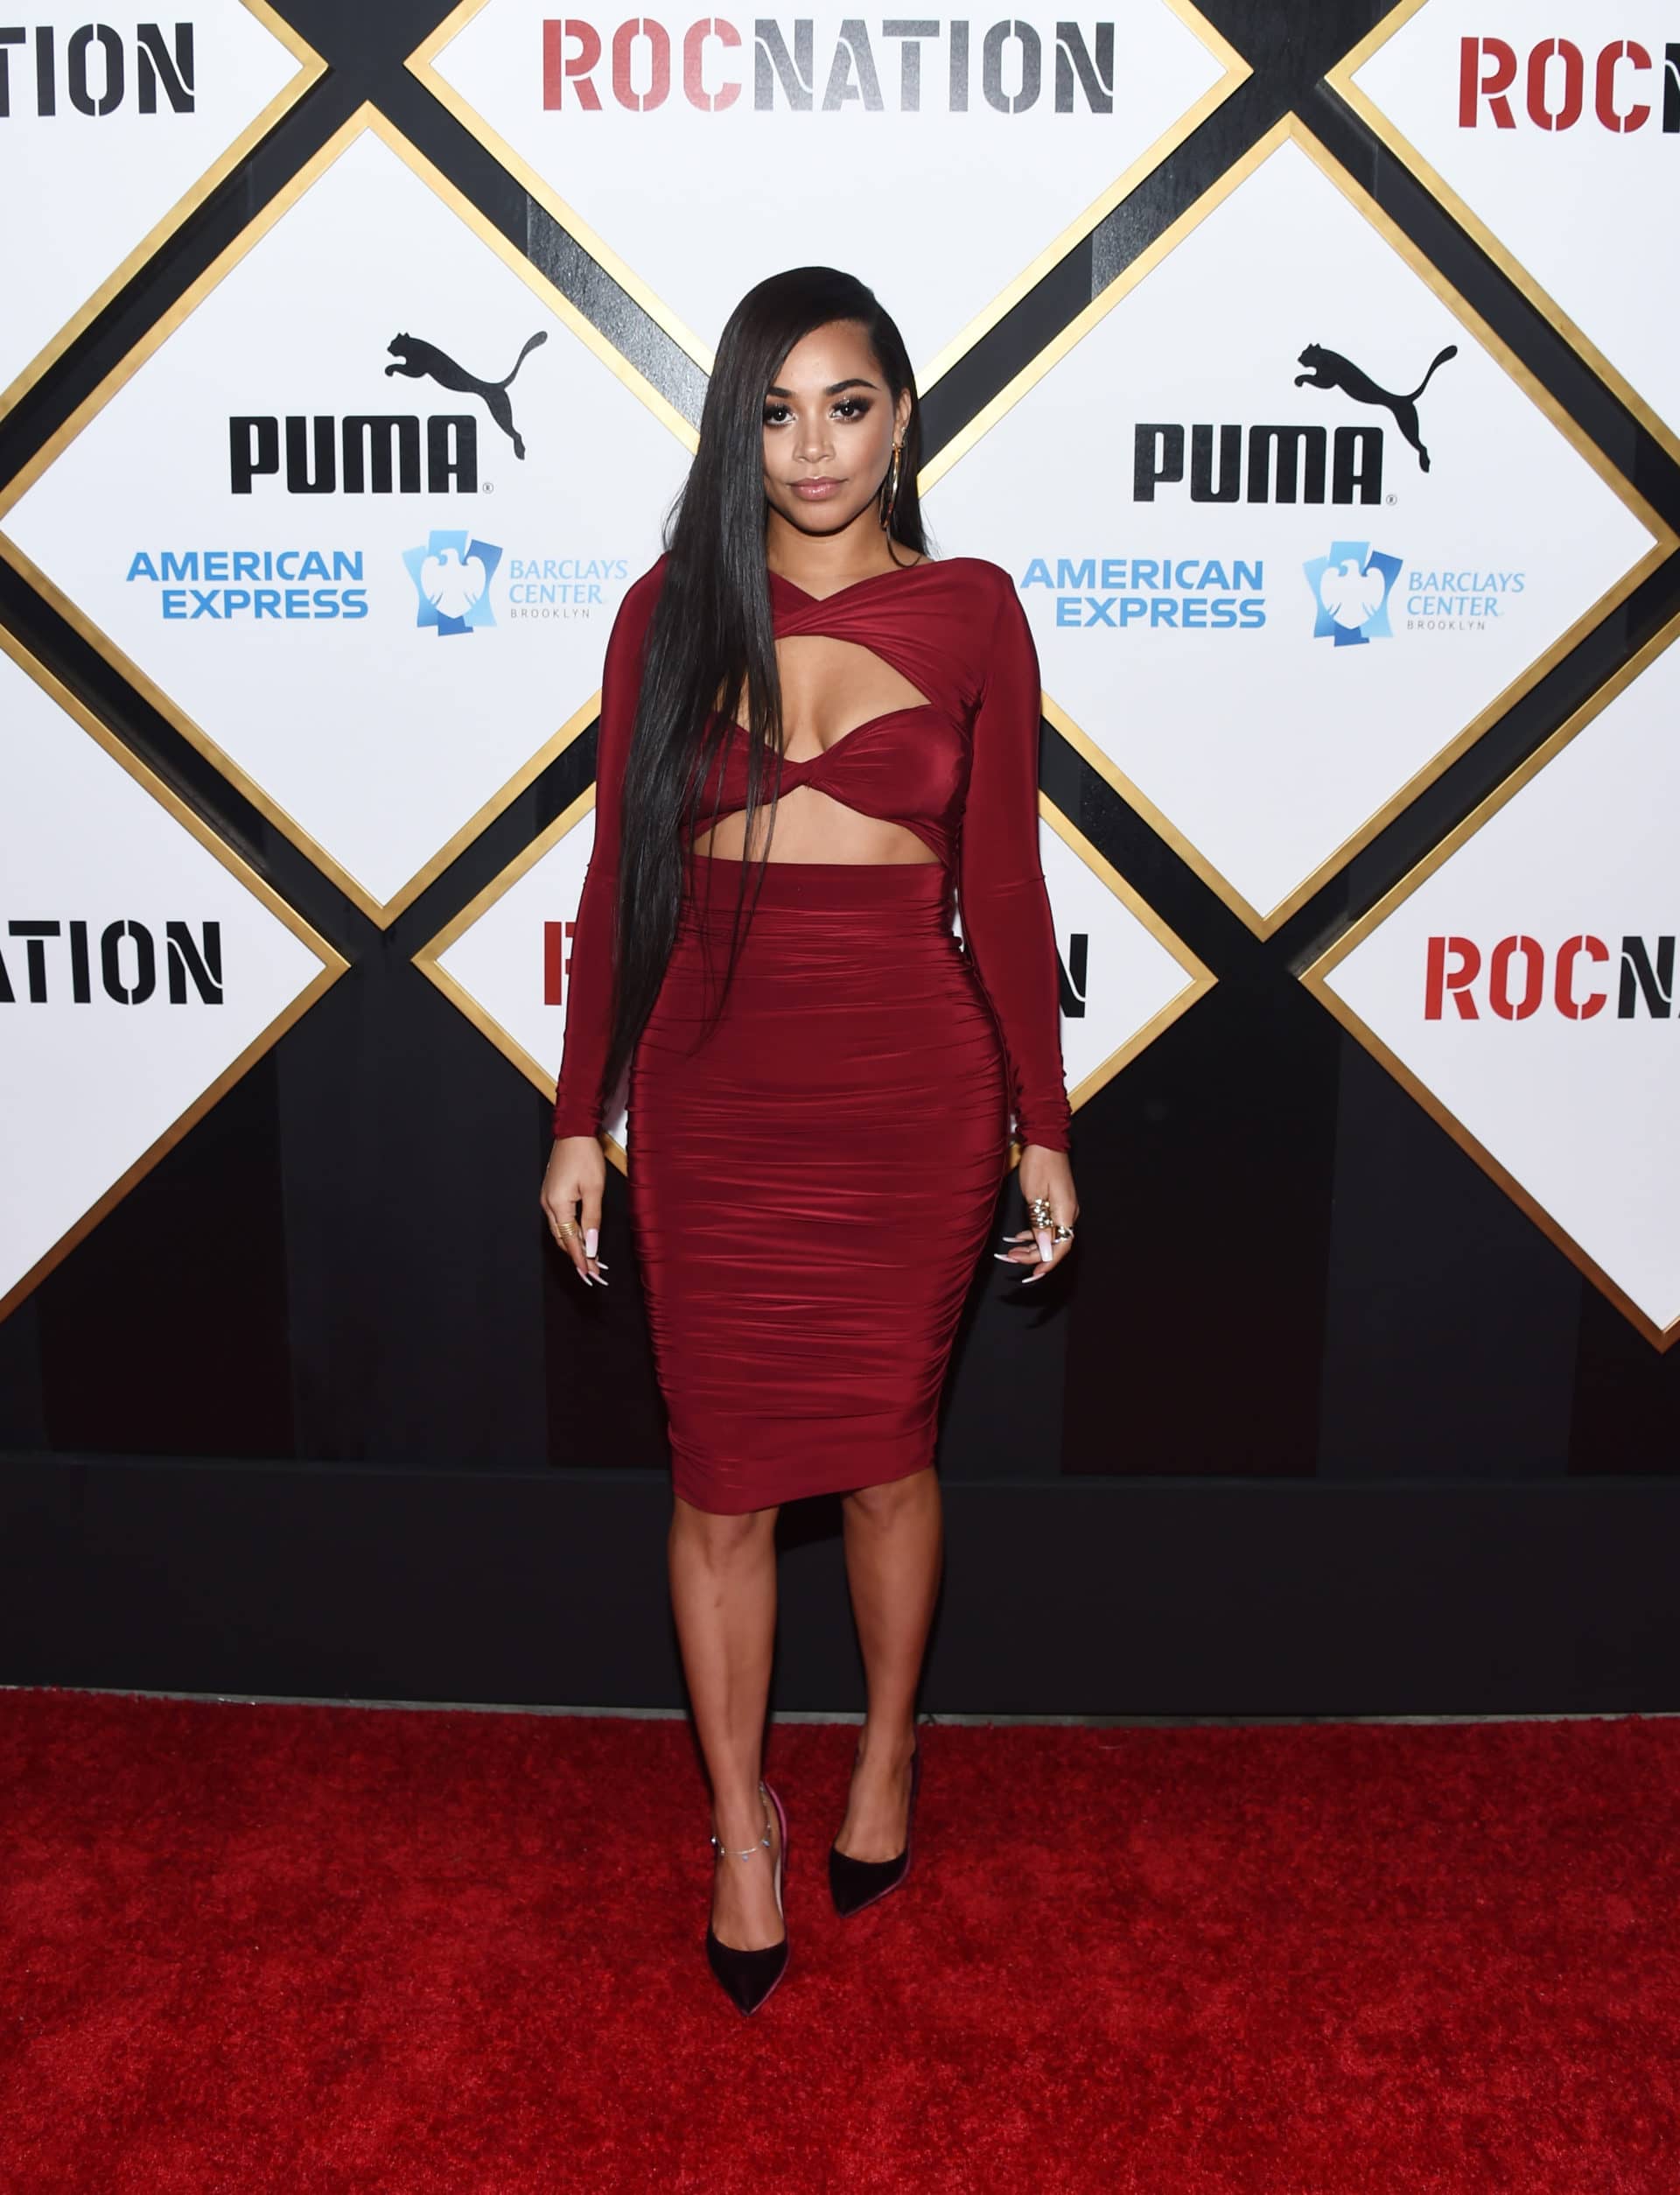 We Honor Lauren London’s Strength And Her Most Glamorous Style Moments!